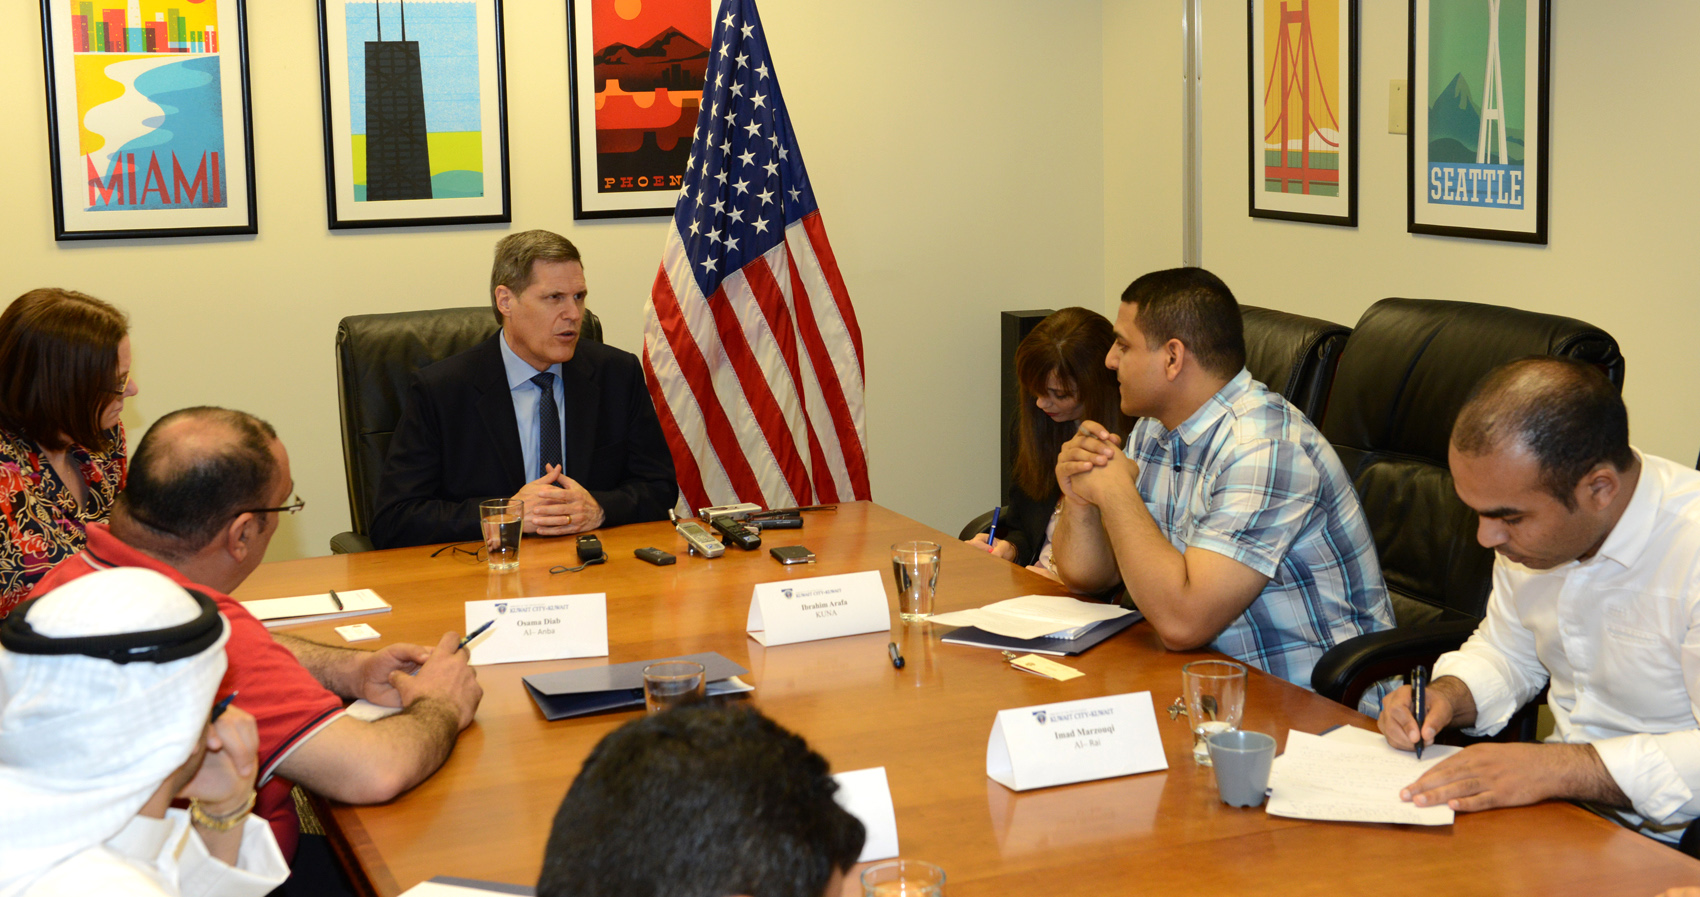 US Ambassador Tueller speaking at a press roundtable at the US Embassy